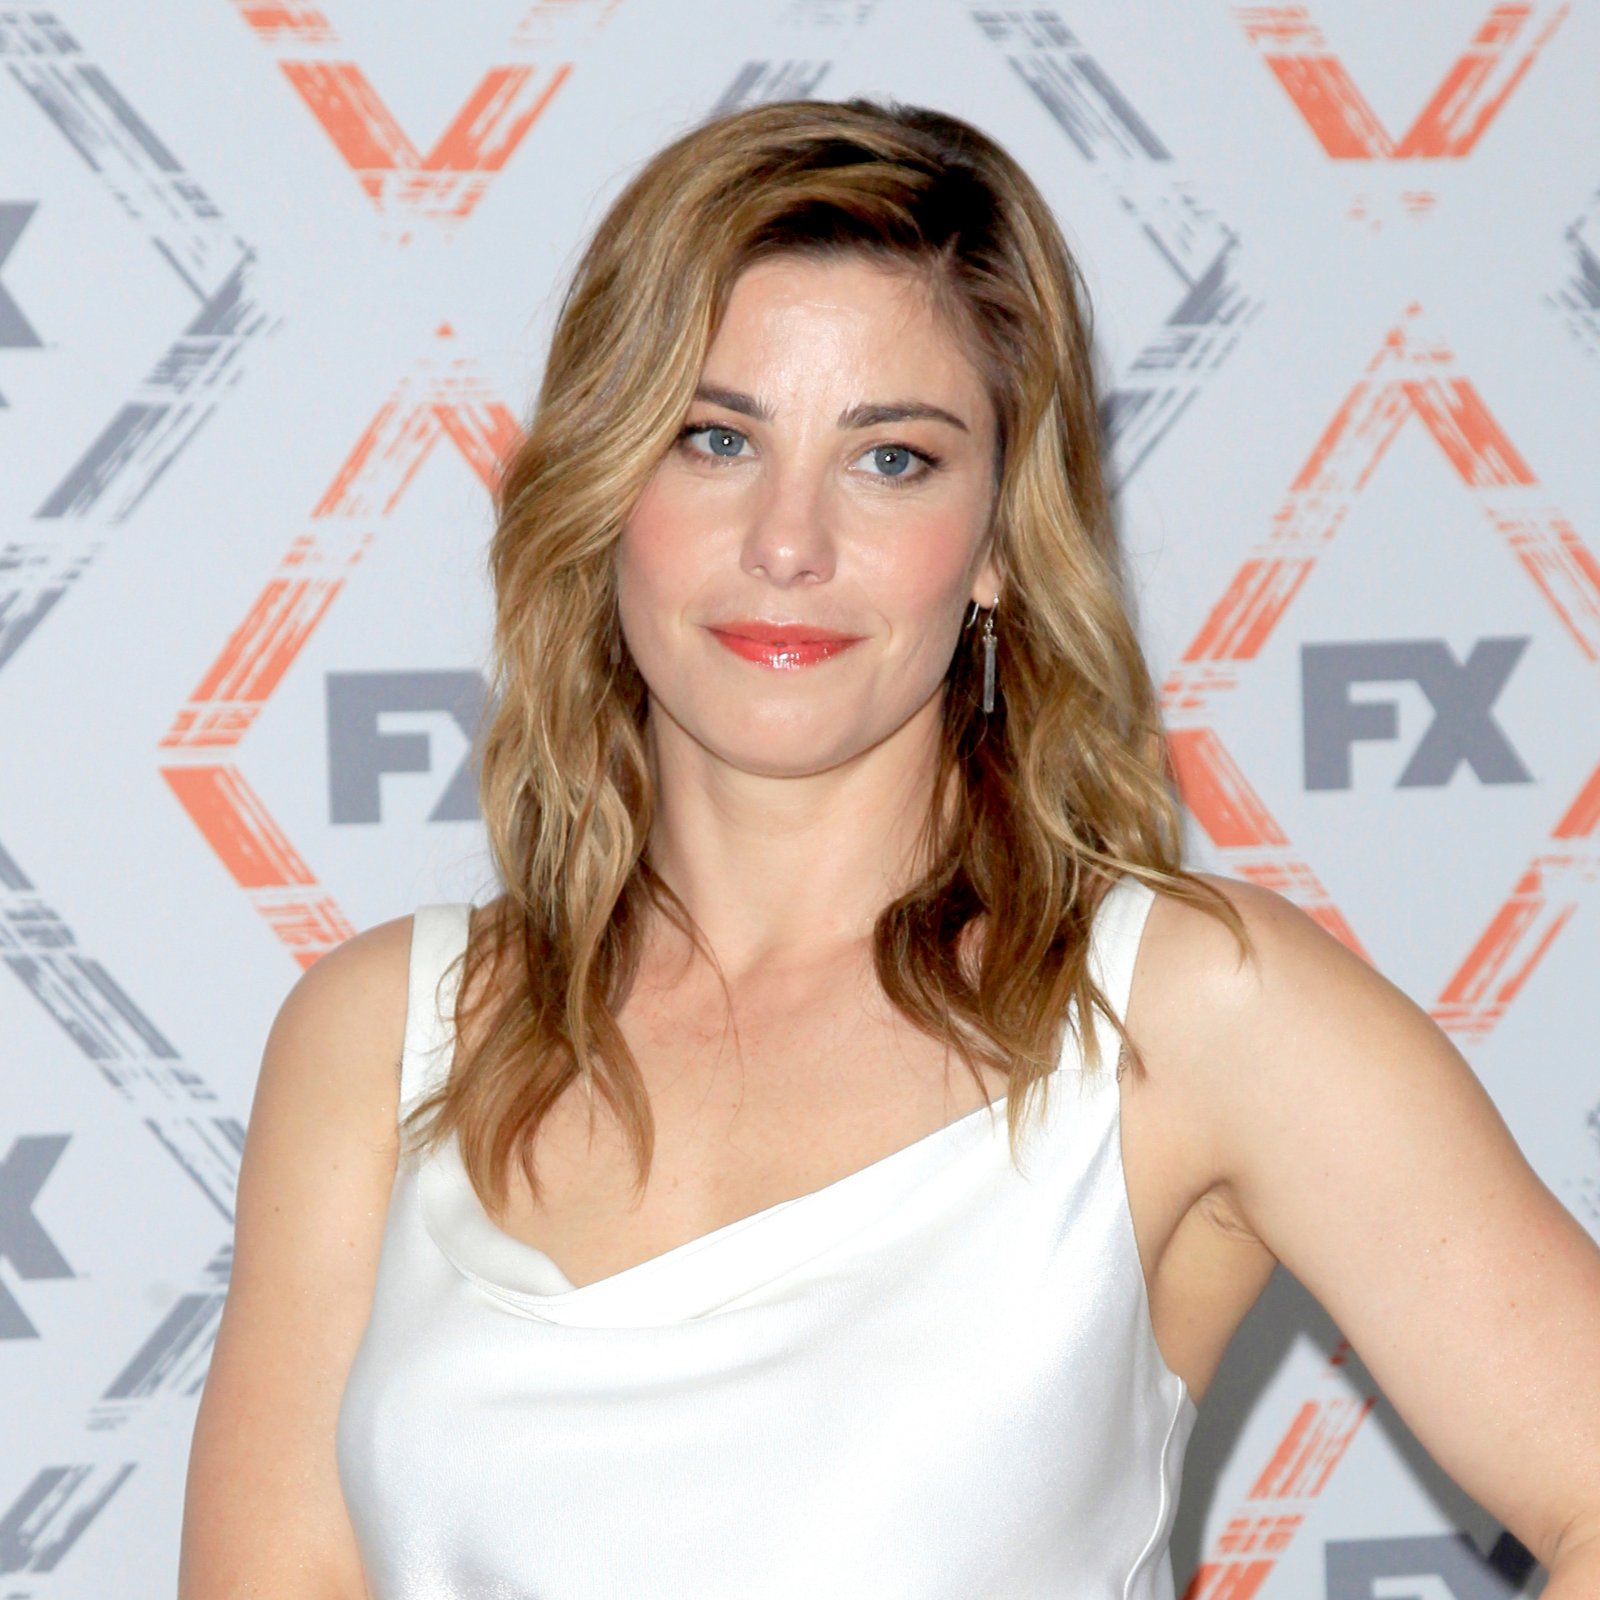 Brooke Satchwell, Los Angeles (3.8.2018) – Kathy Hutchinson / Shutterstock